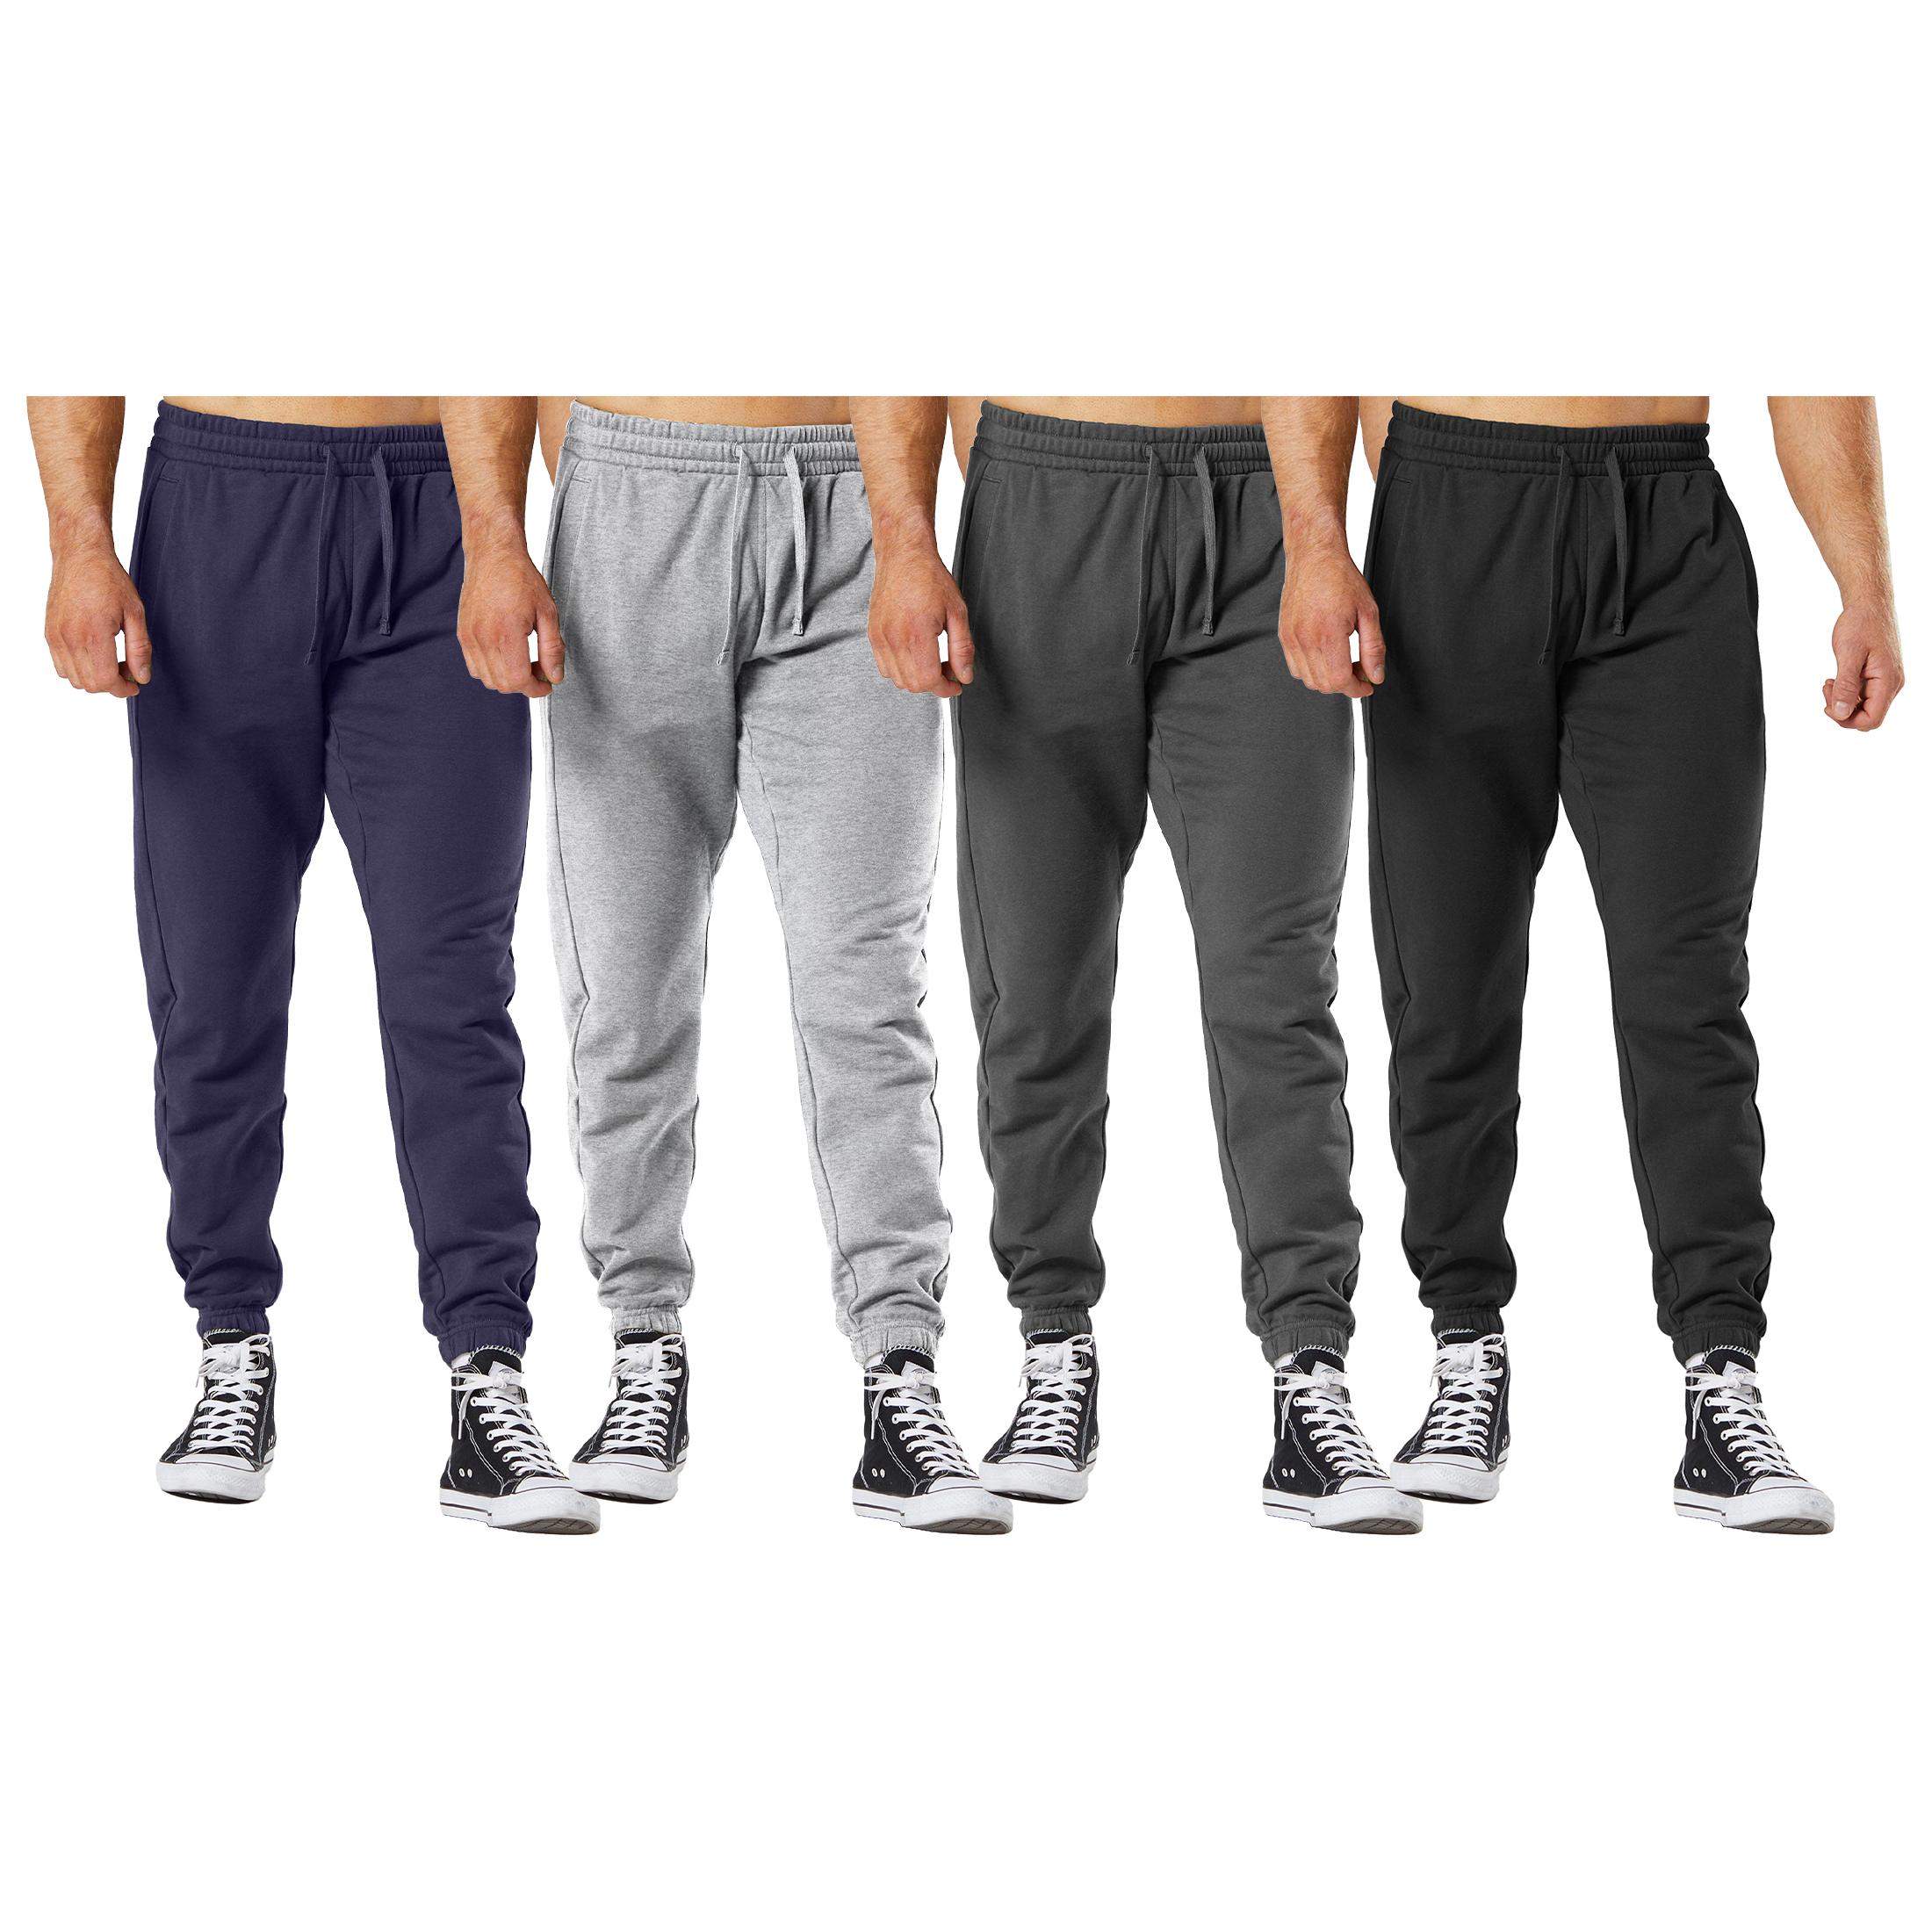 3-Pack: Men's Casual Fleece-Lined Elastic Bottom Sweatpants Jogger Pants With Pockets - Solid, Large